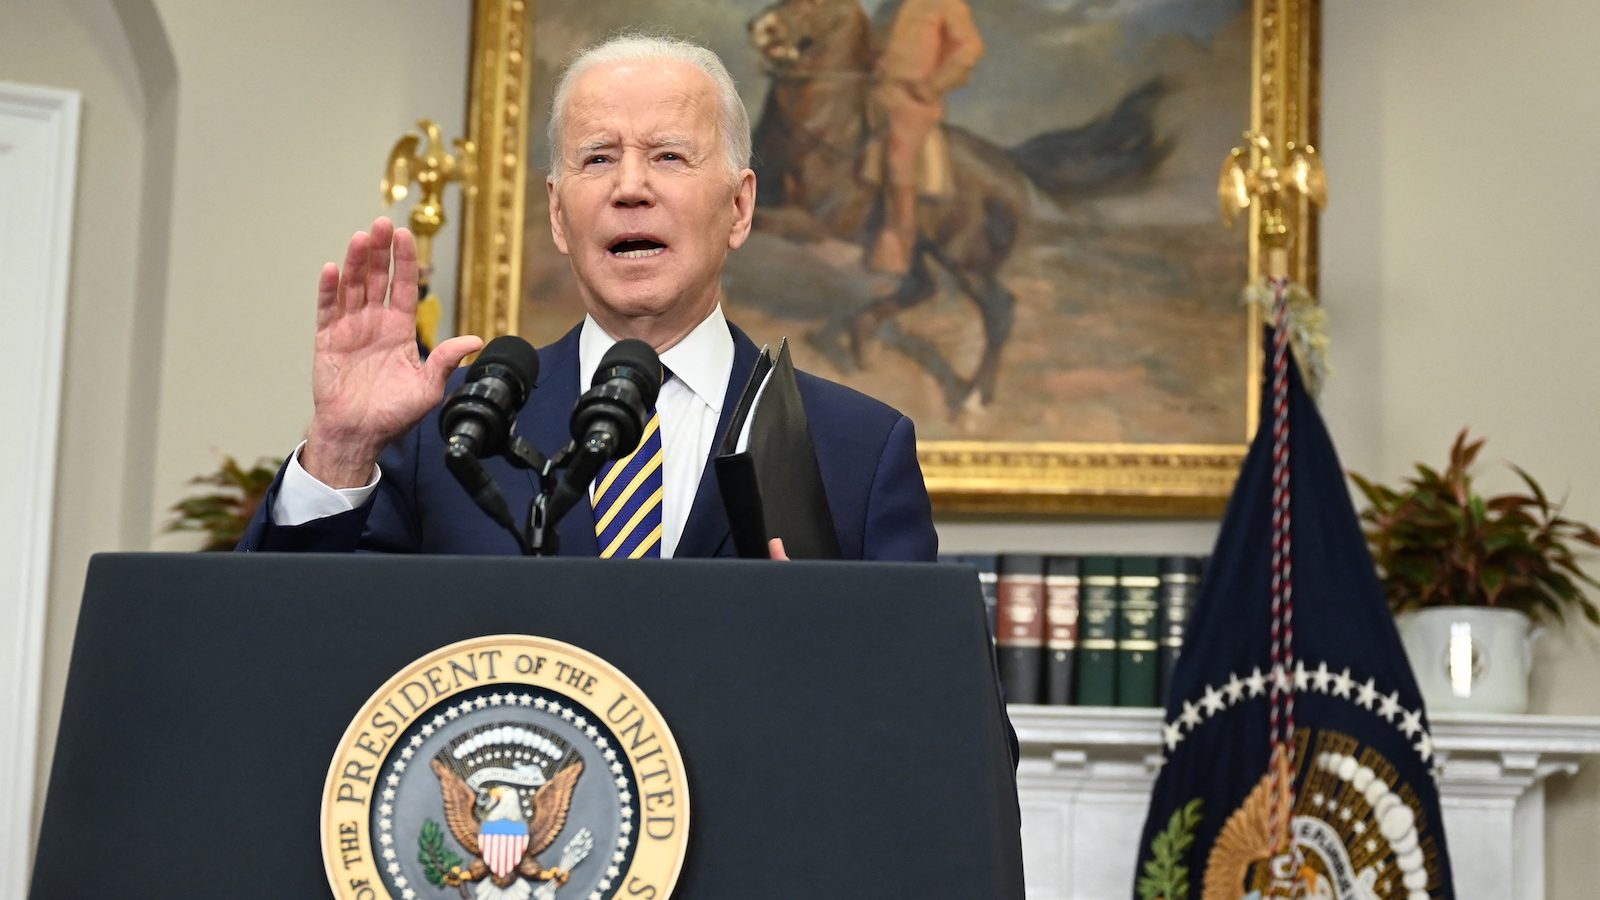 Biden at a podium beside a flag of the presidential seal.